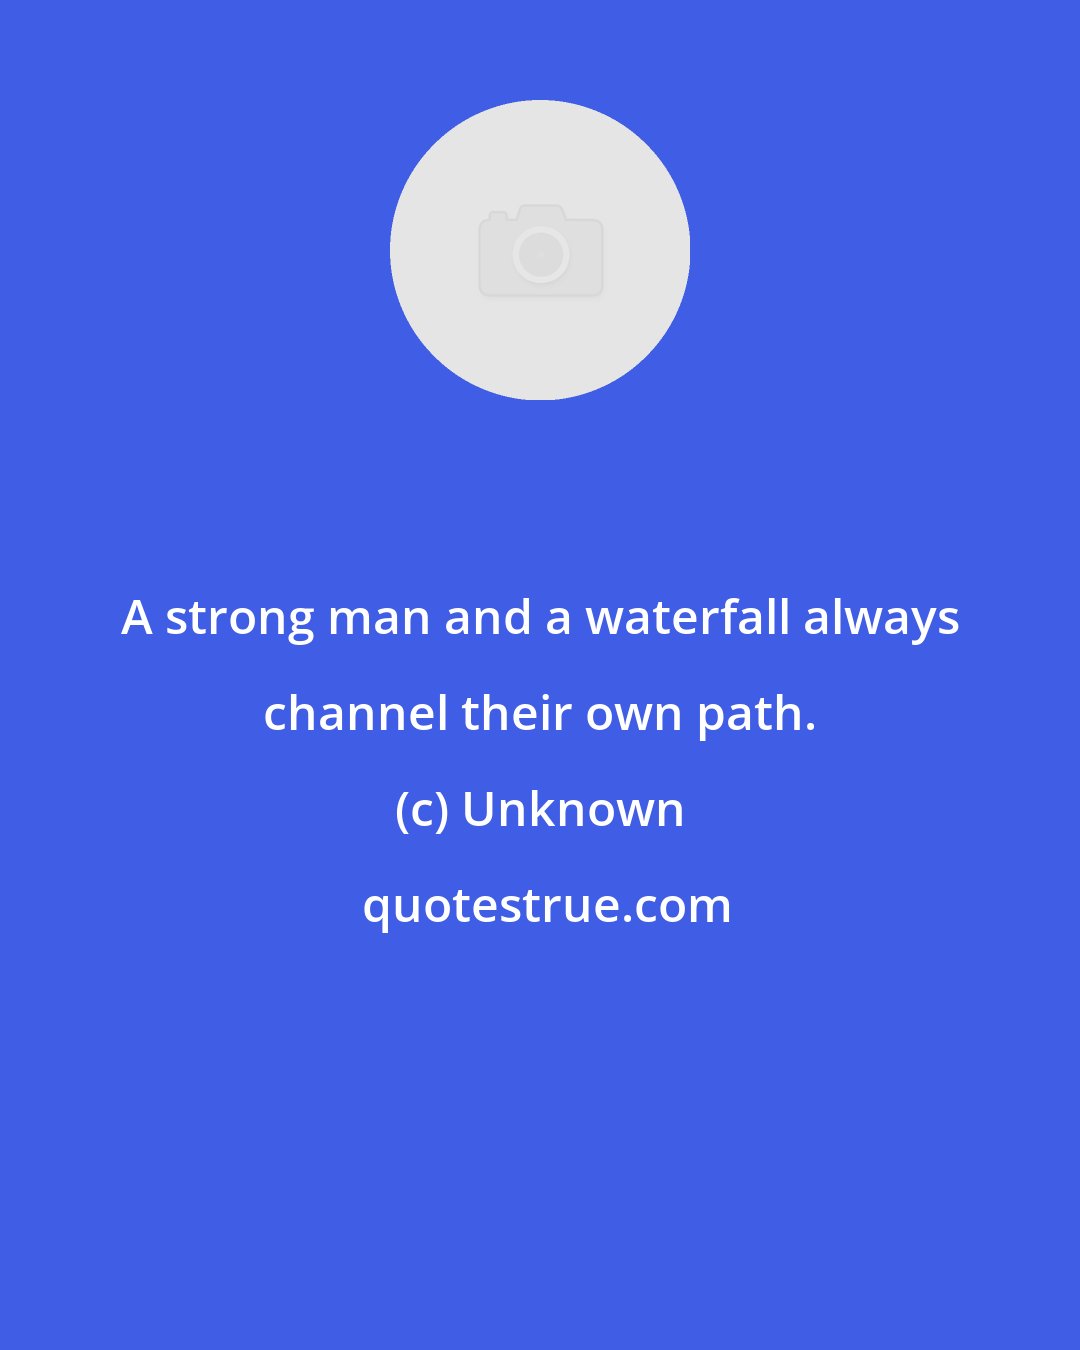 Unknown: A strong man and a waterfall always channel their own path.